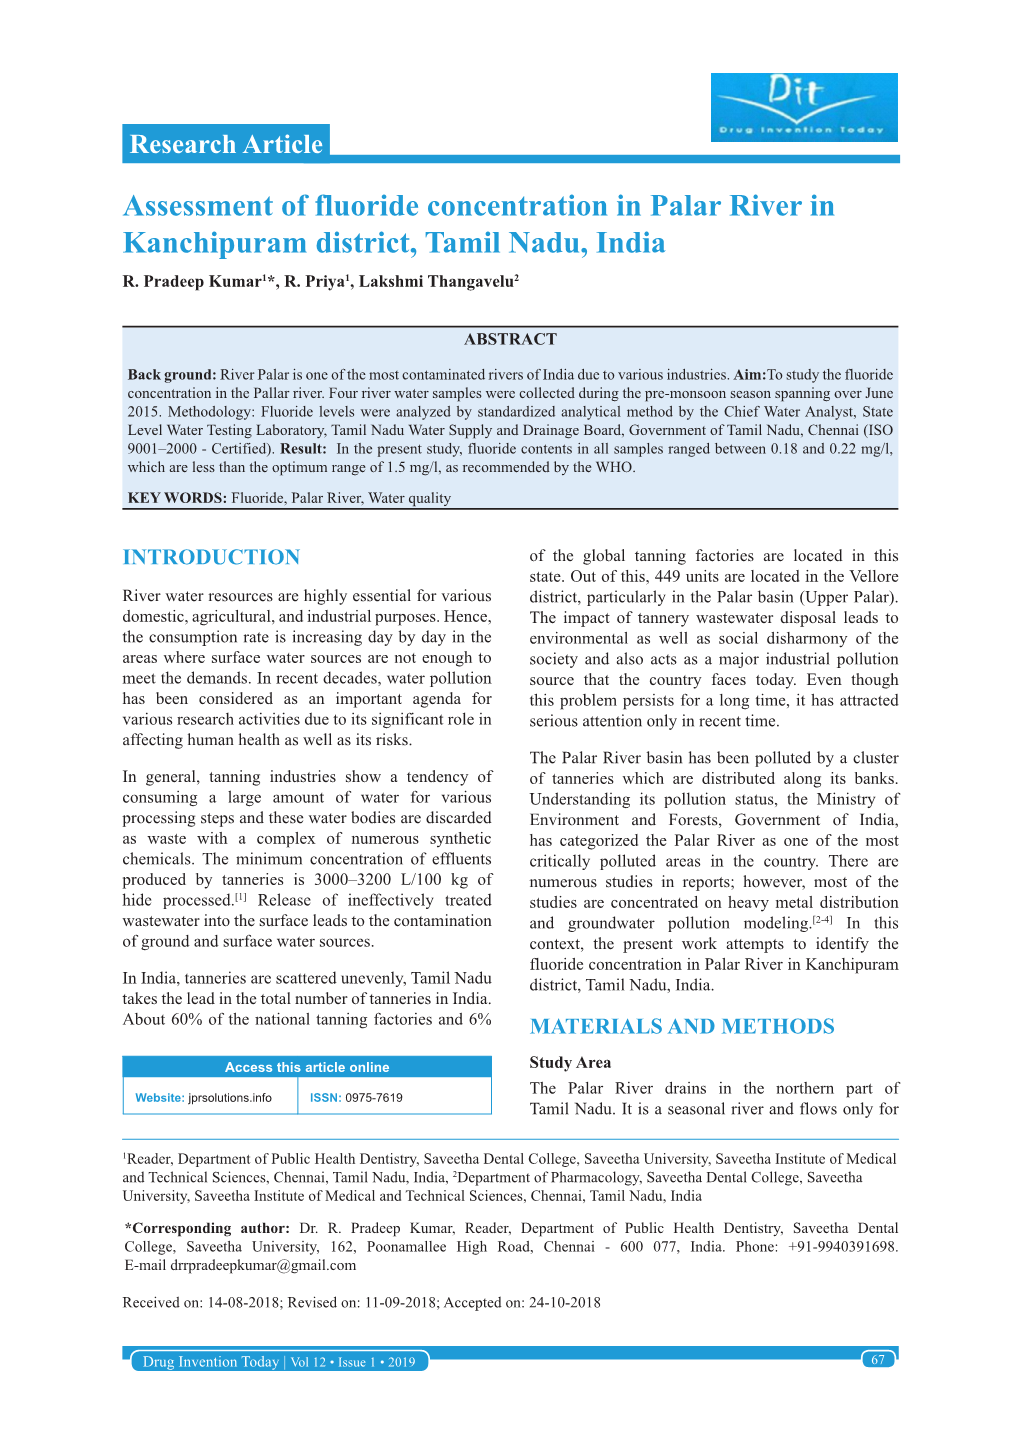 Assessment of Fluoride Concentration in Palar River in Kanchipuram District, Tamil Nadu, India R